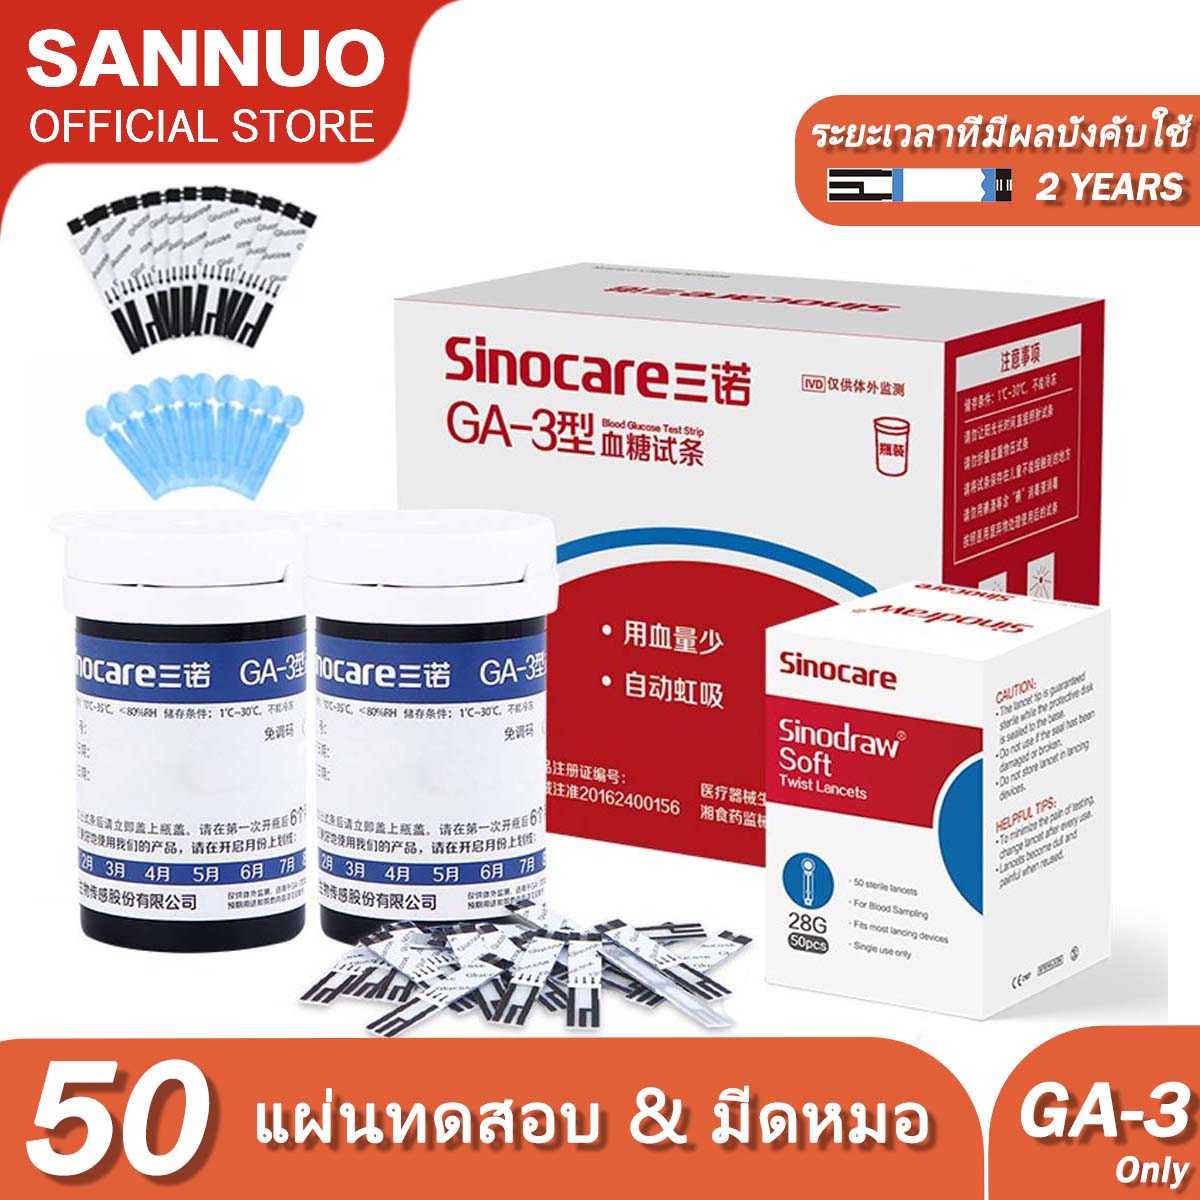 Sannuo Sinocare GA-3 Blood Glucose Monitors 50 Pcs Test Strips and 50 Pcs Lancets for Diabetes(NO Monitor，Suitable for GA-3 Glucometer only)